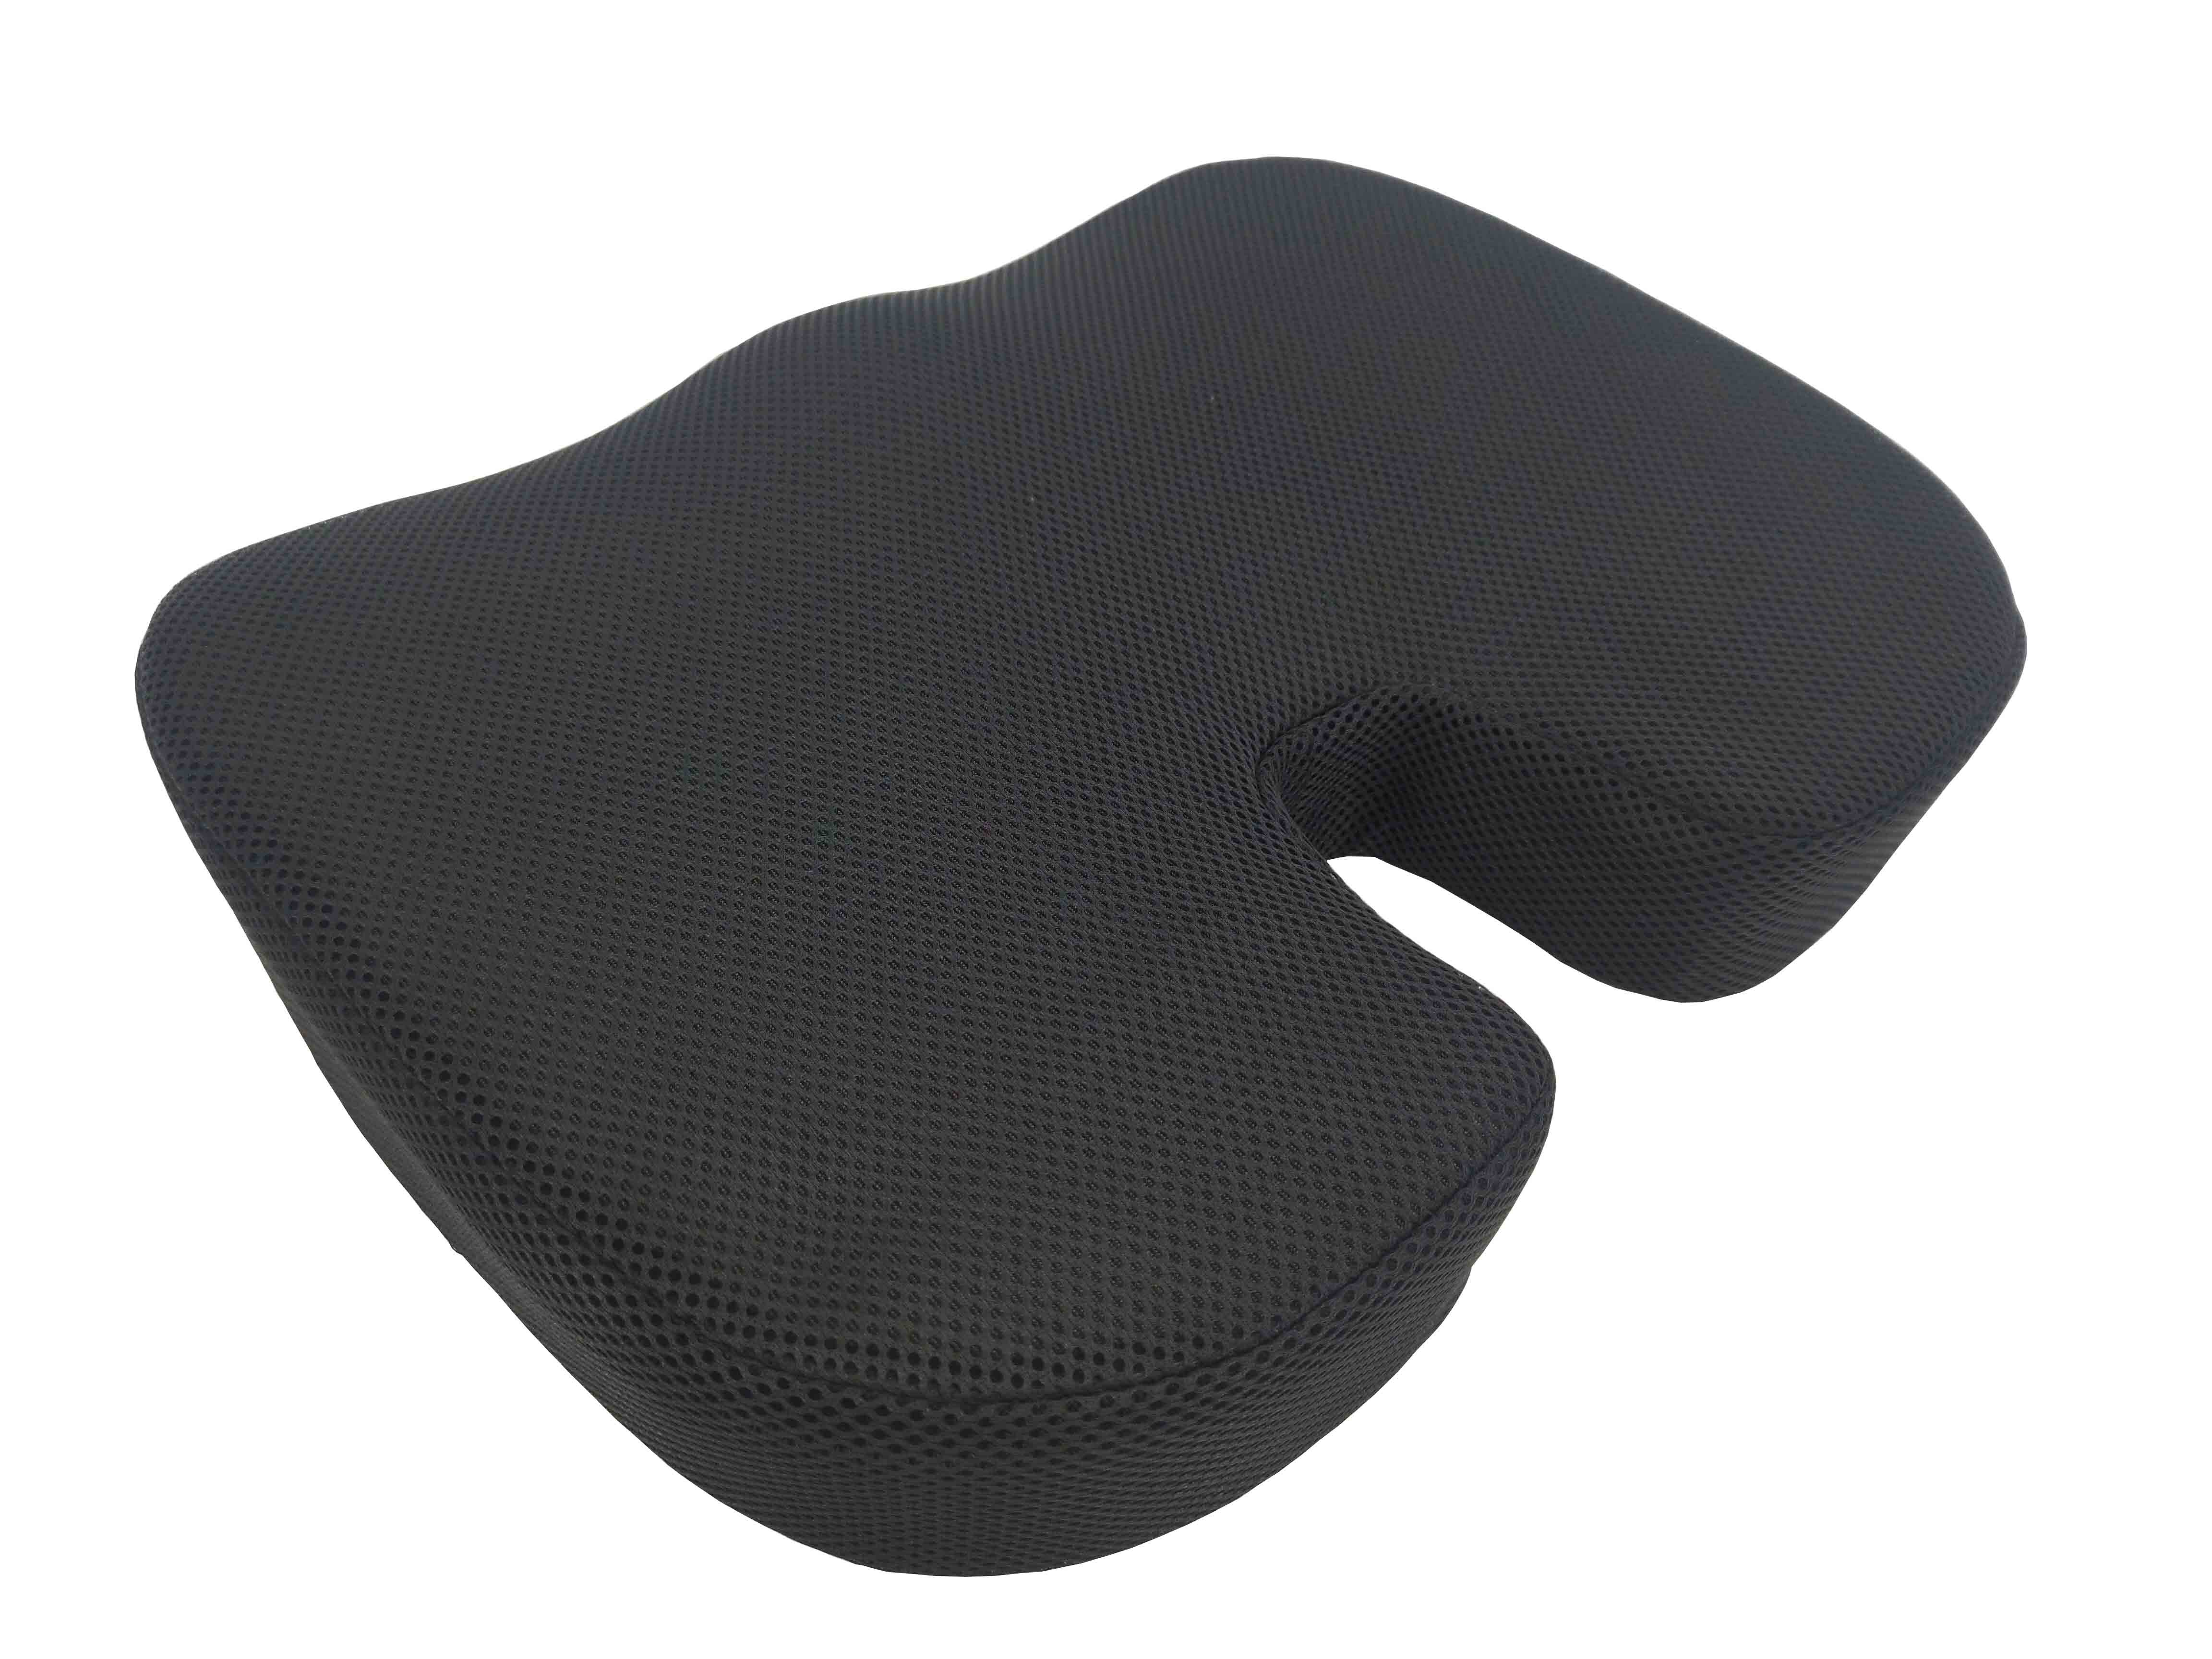 Sleepavo Soft Memory Foam Seat Cushion for Office Chair - Pillow for Sciatica, Coccyx, Back, Tailbone & Lower Back Pain Relief - Orthopedic Chair Pad